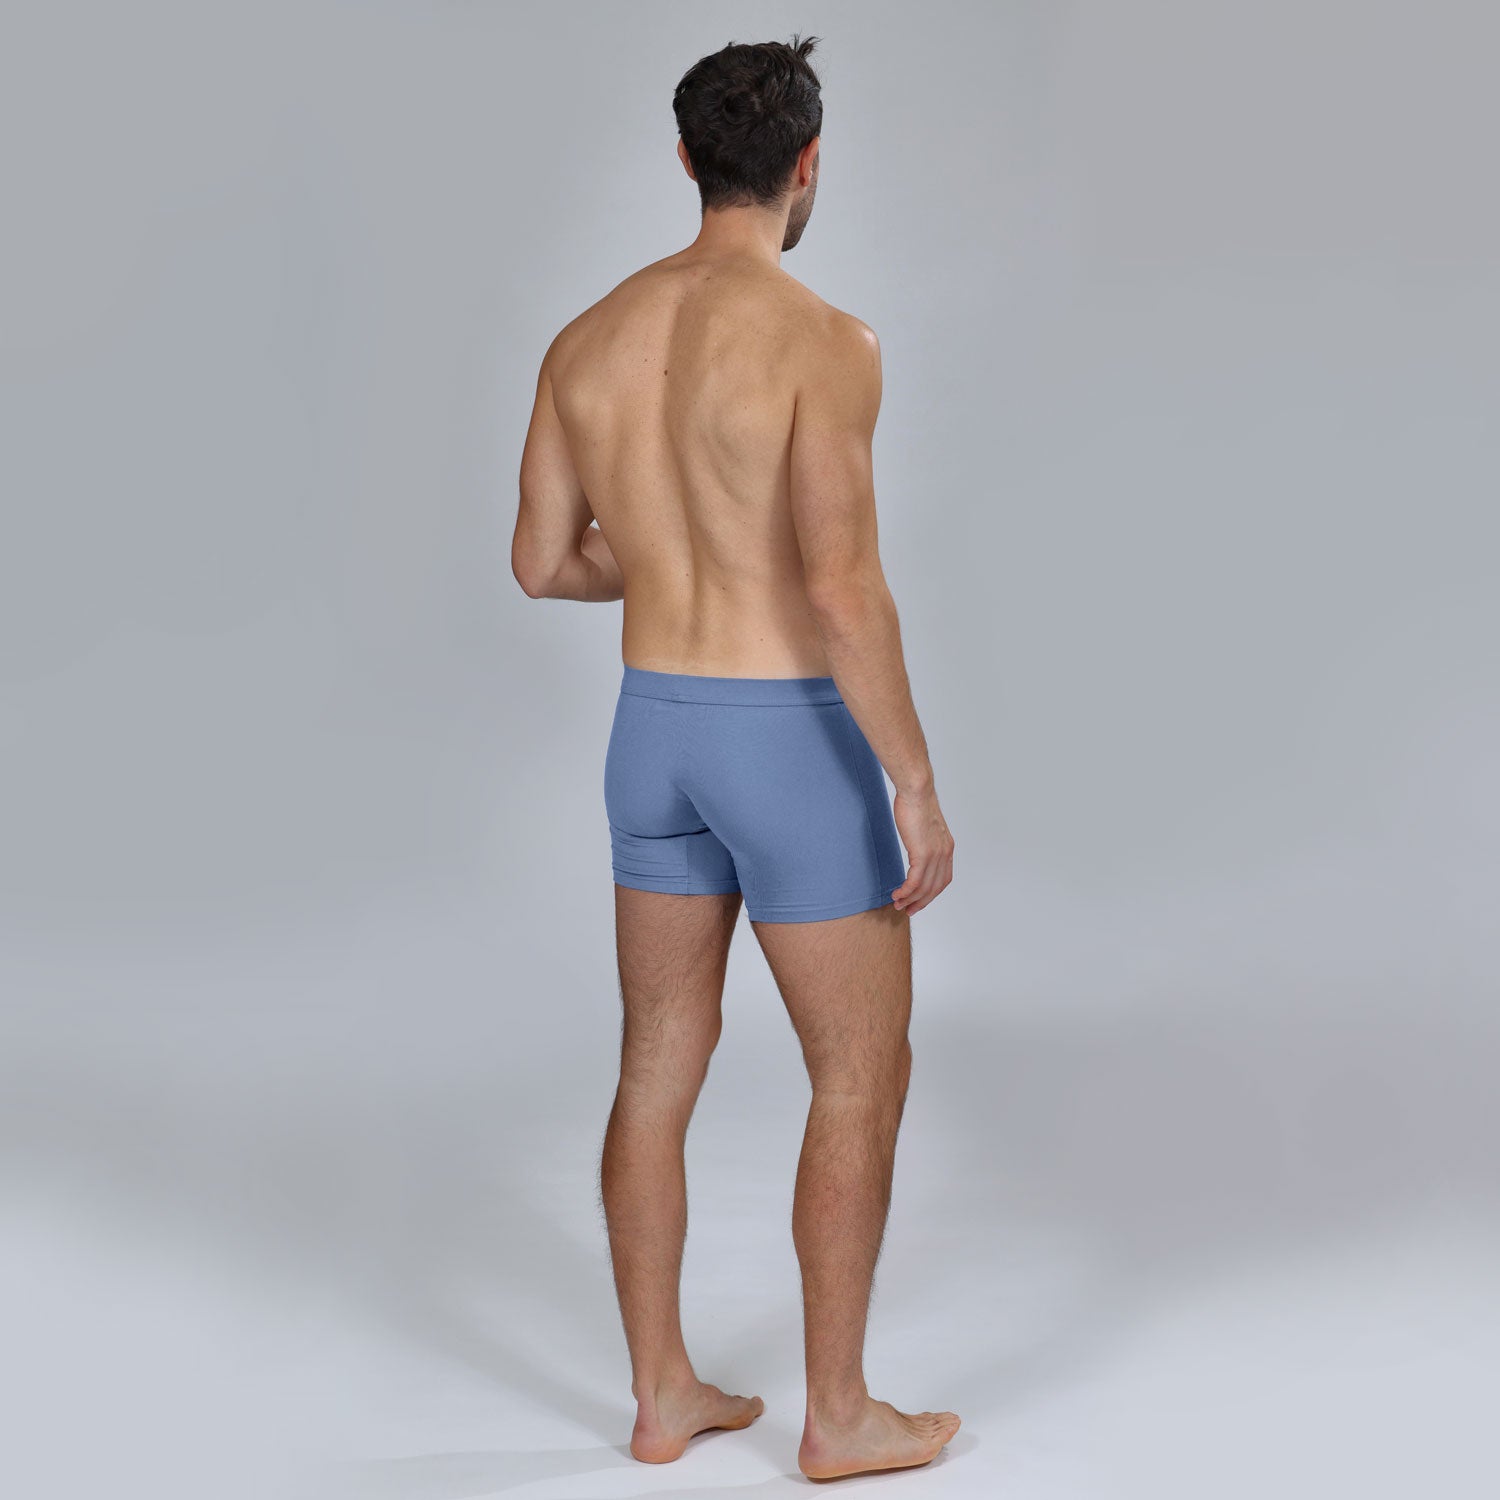 The Limited Edition Serenity Boxer Brief for men in the USA and Canada